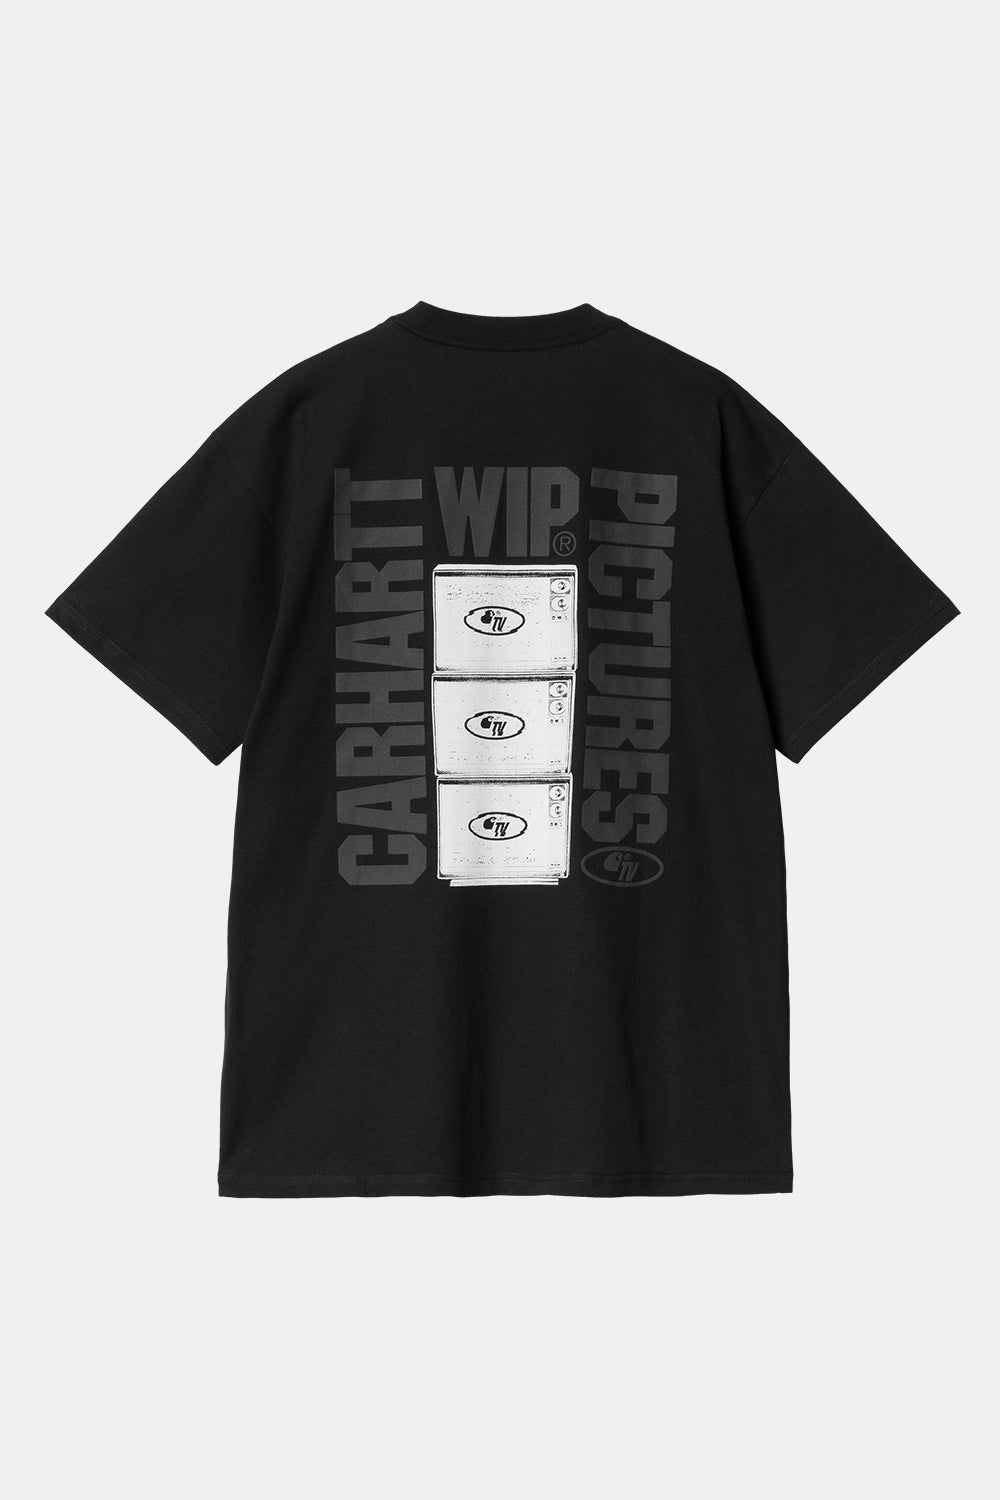 Carhartt WIP Short Sleeve Pictures T-Shirt (Black)